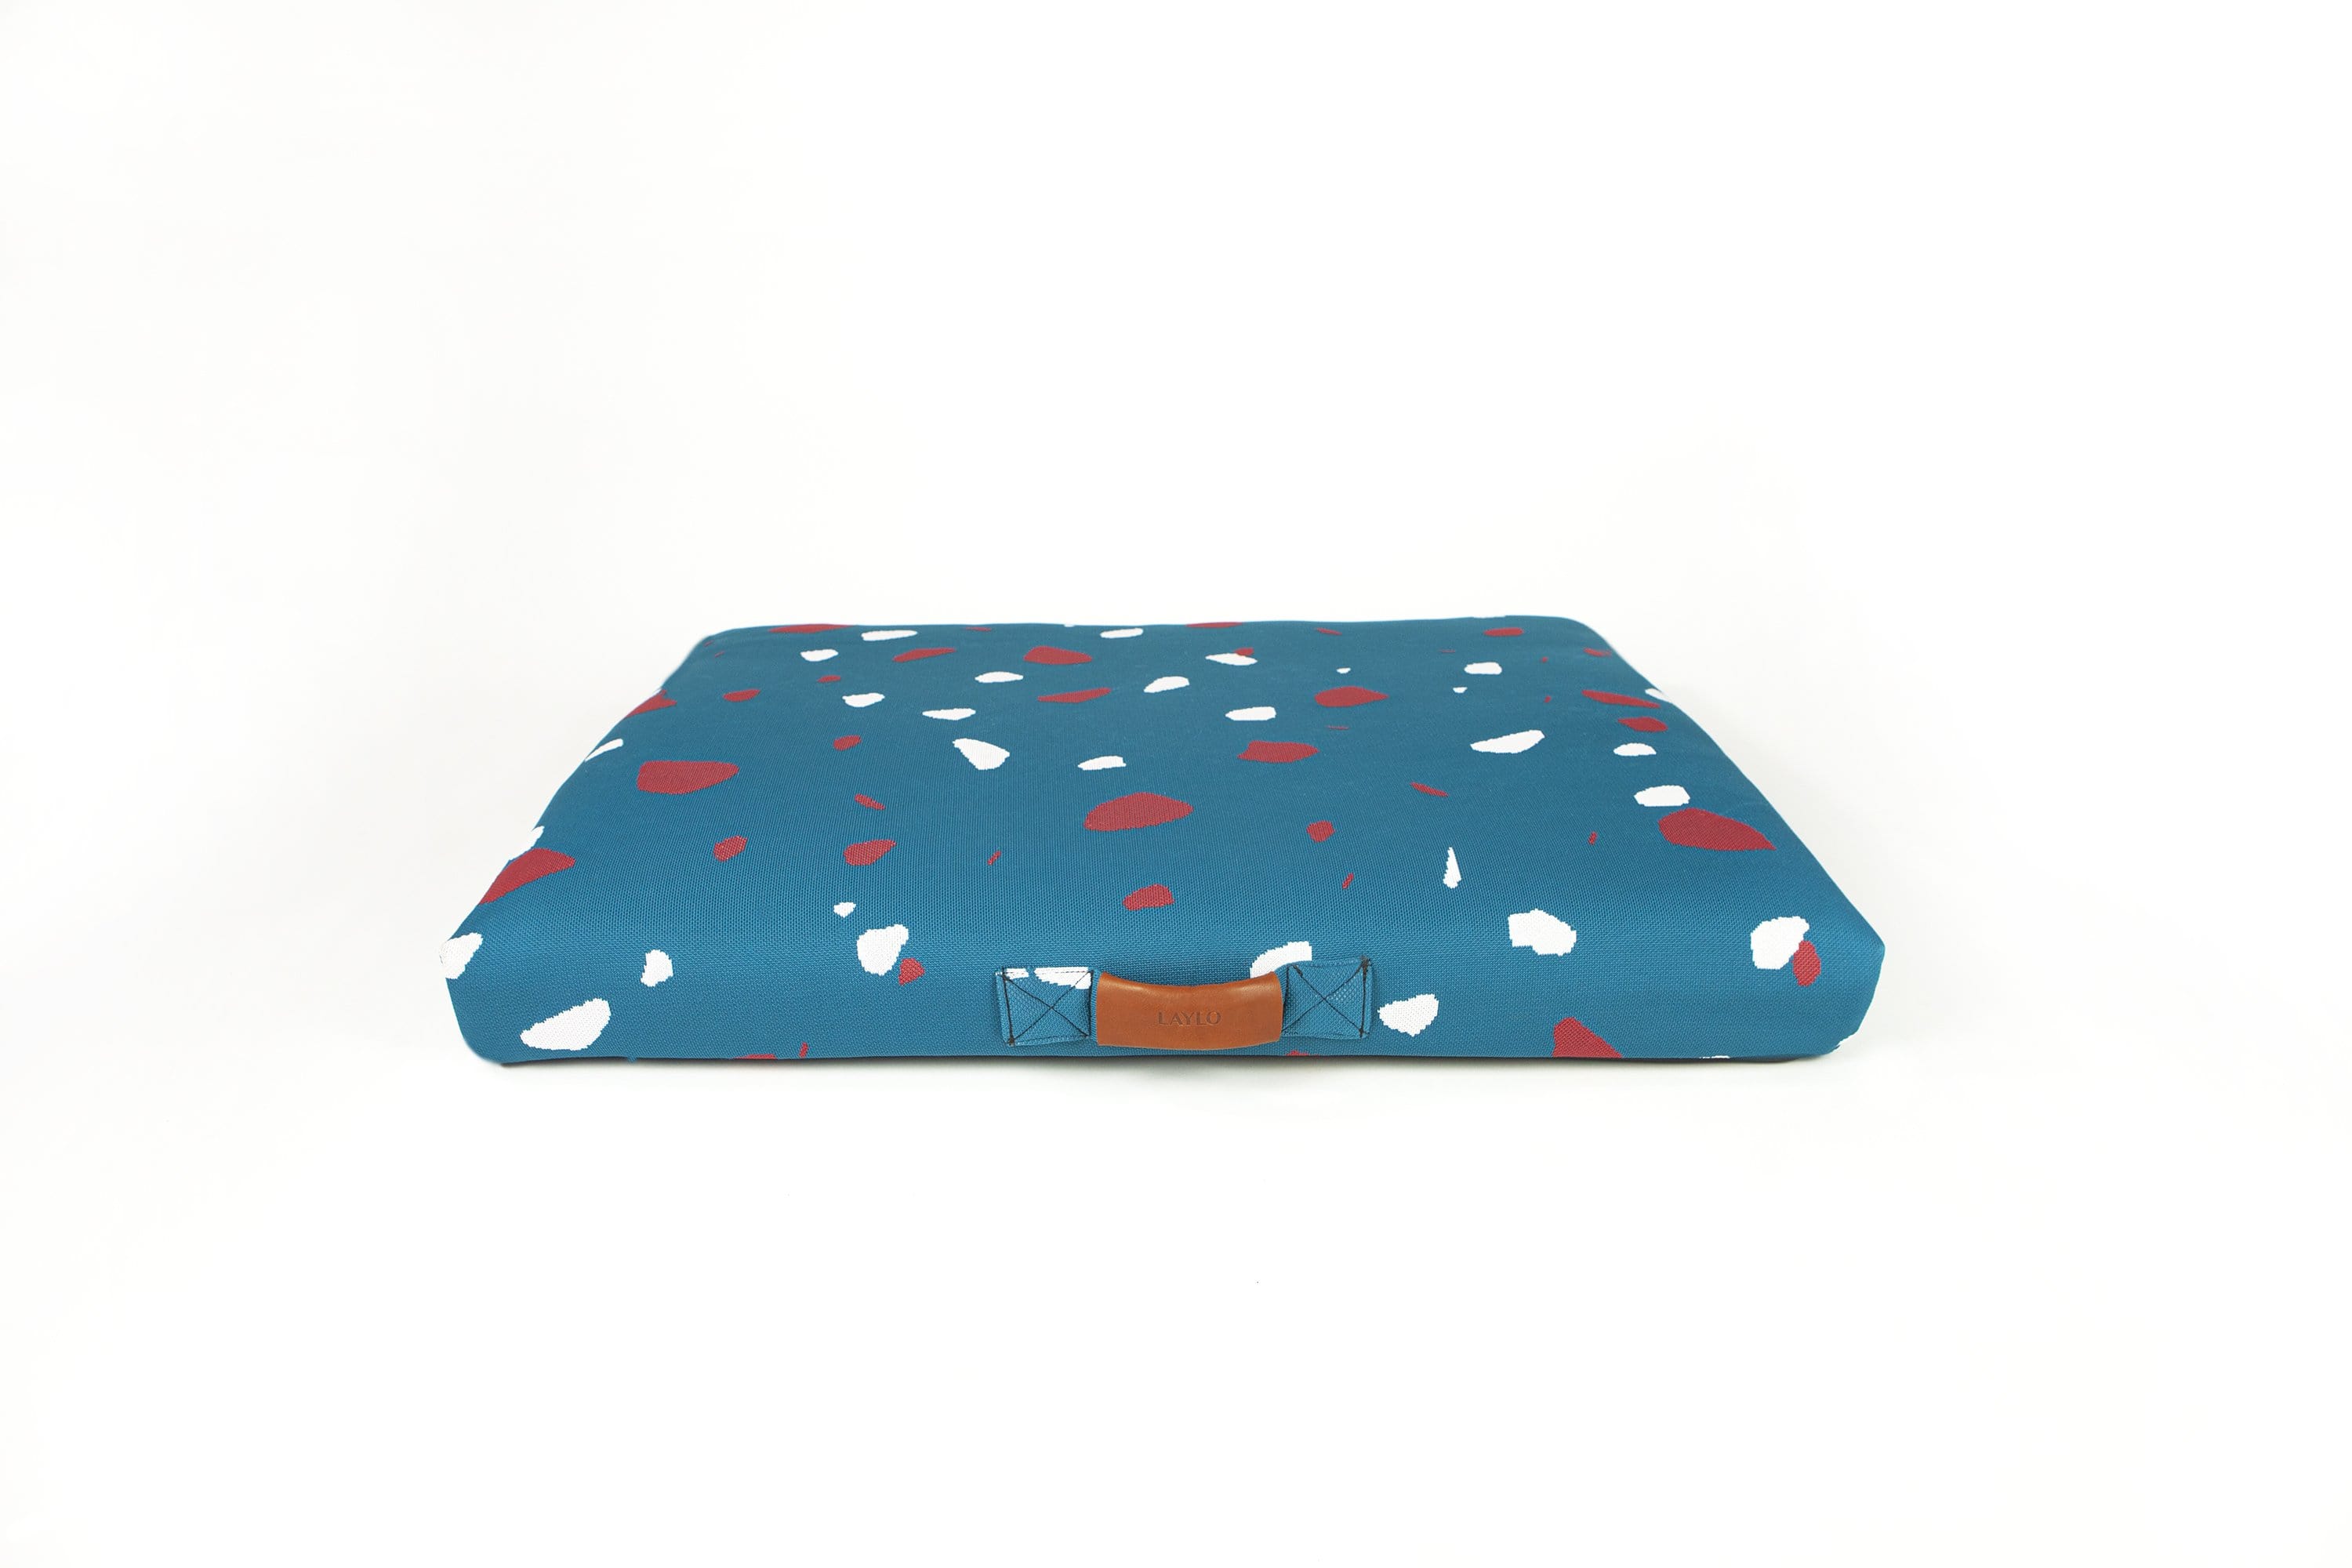 Laylo Pets Terrazzo LAY LO - Teal Terrazzo Mid-Century Modern Dog Bed or Bed Cover Lay Lo Pets